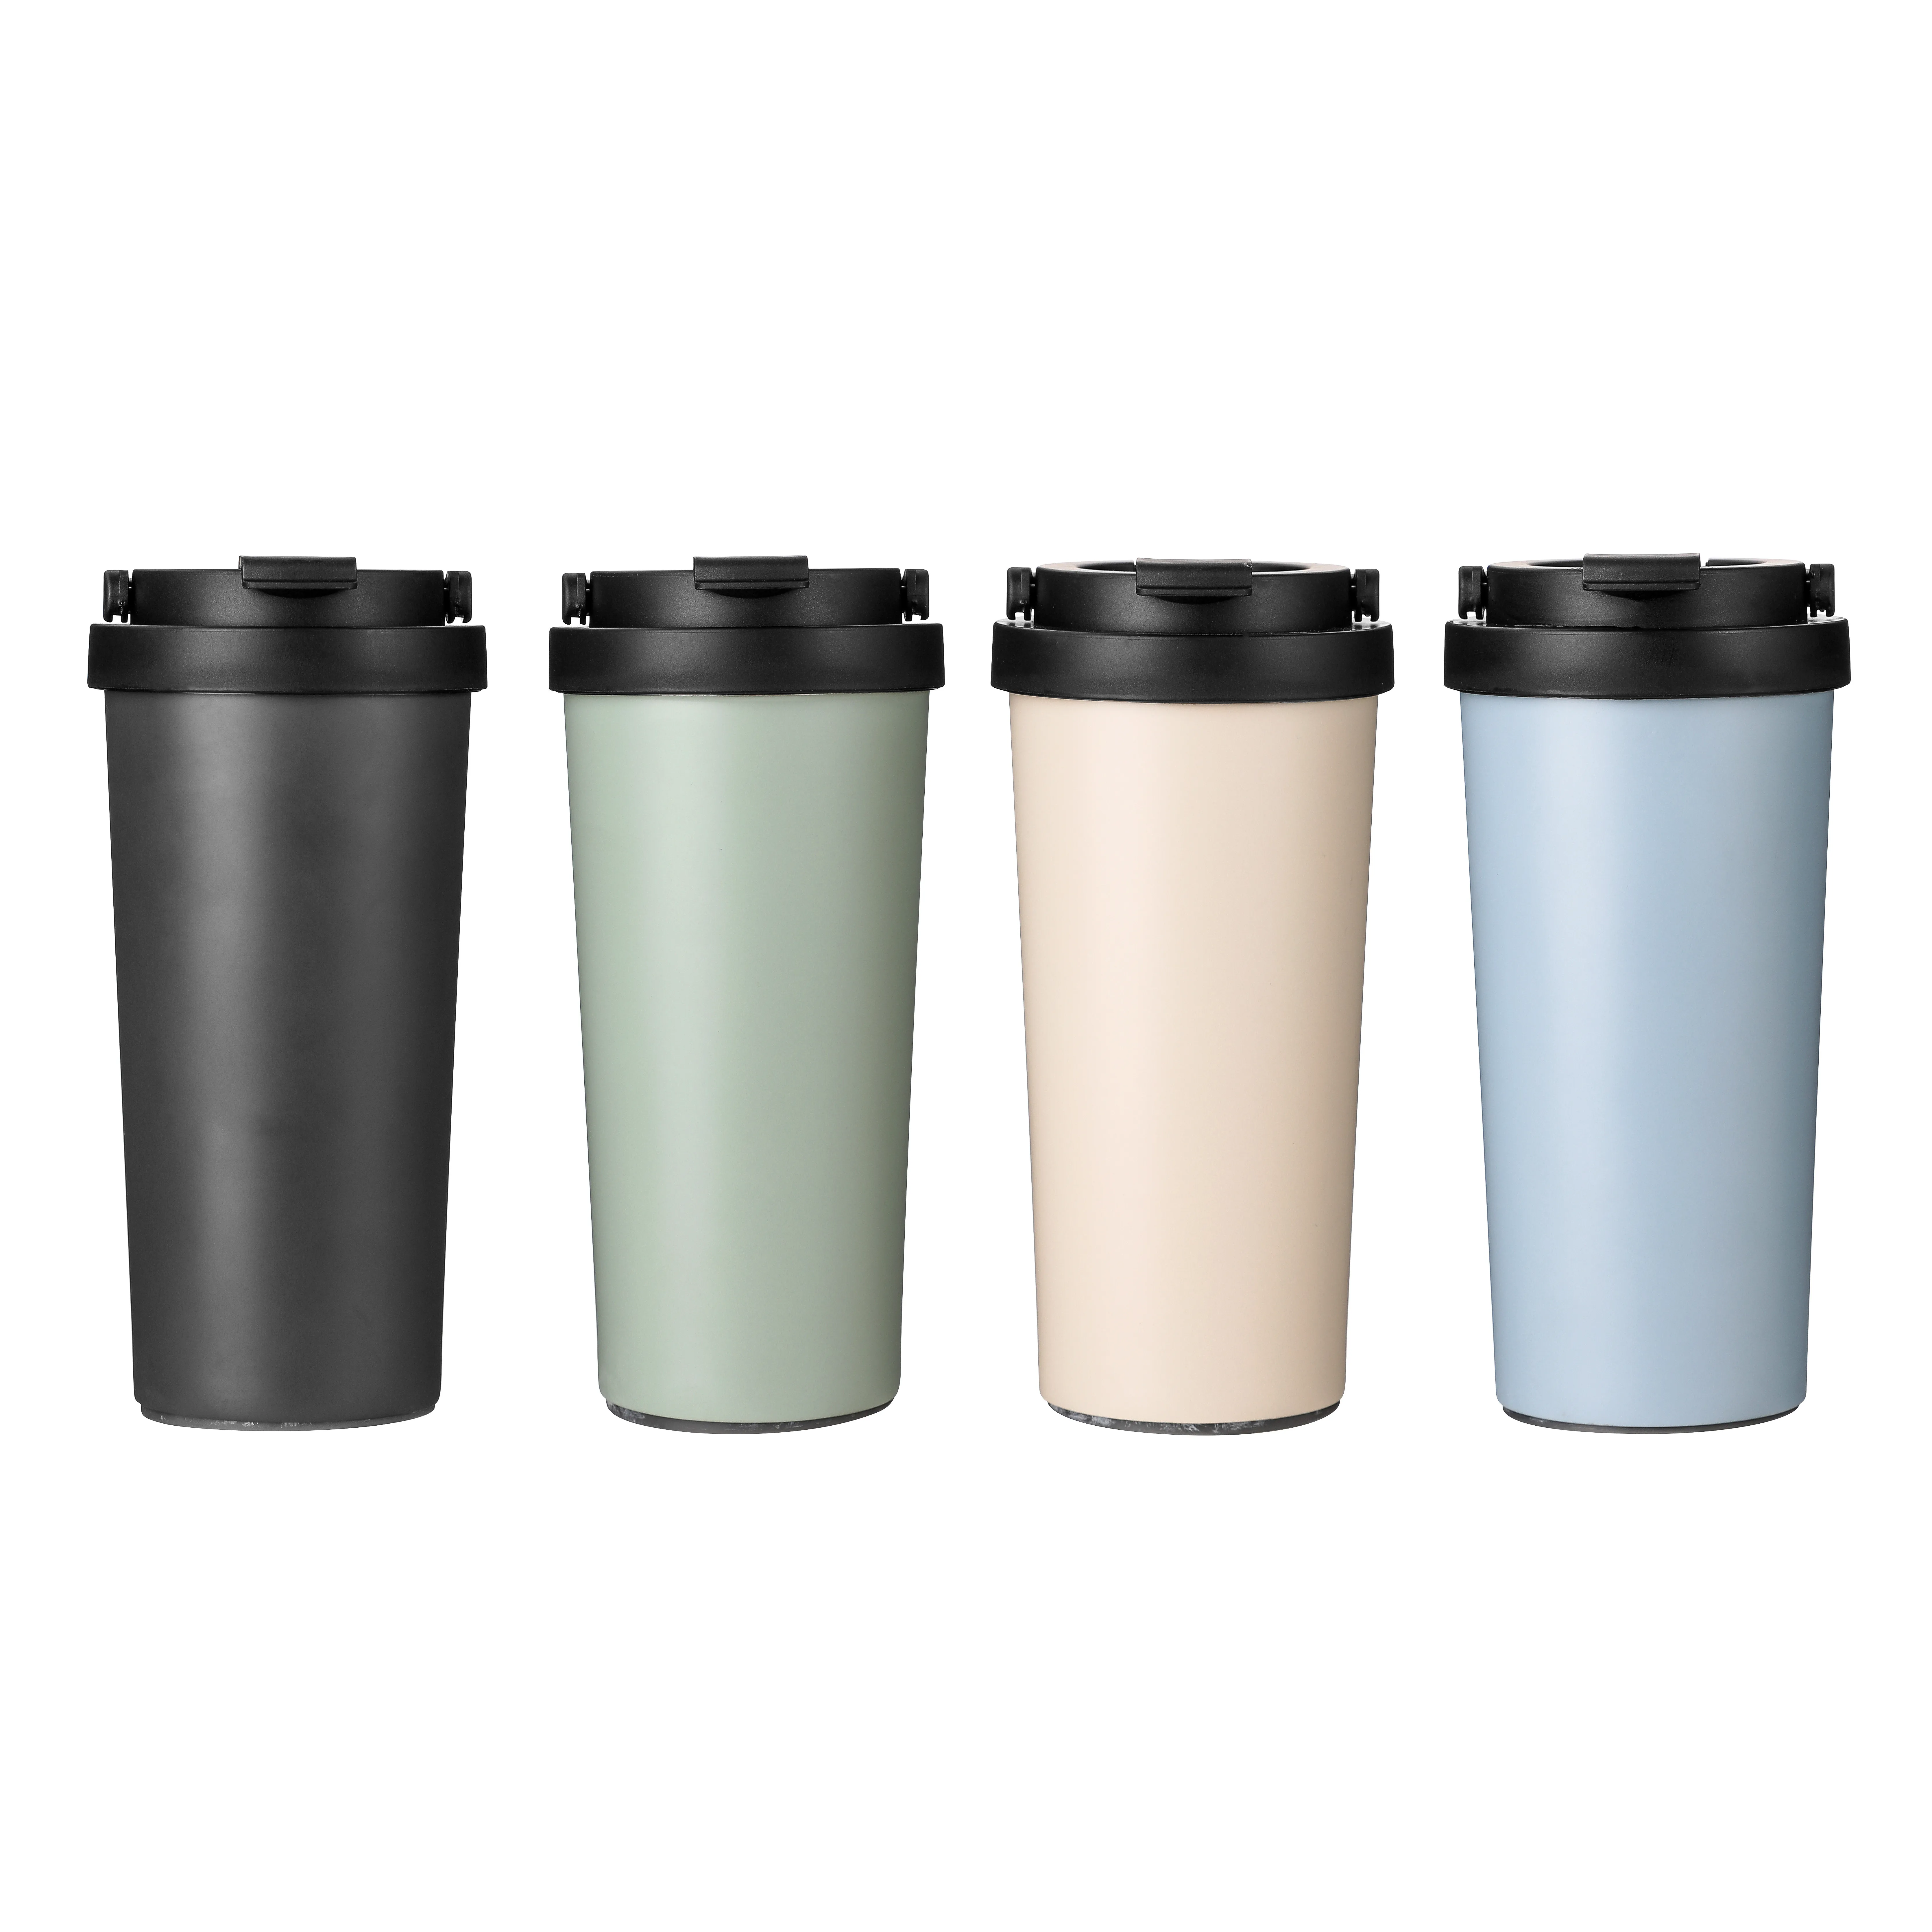 

2020 Best Selling Mighty Magic Bottle Stainless Steel Suction Cups Bottom Travel Coffee Tea Milk Mug Tumbler Spill Free, Customized color acceptable